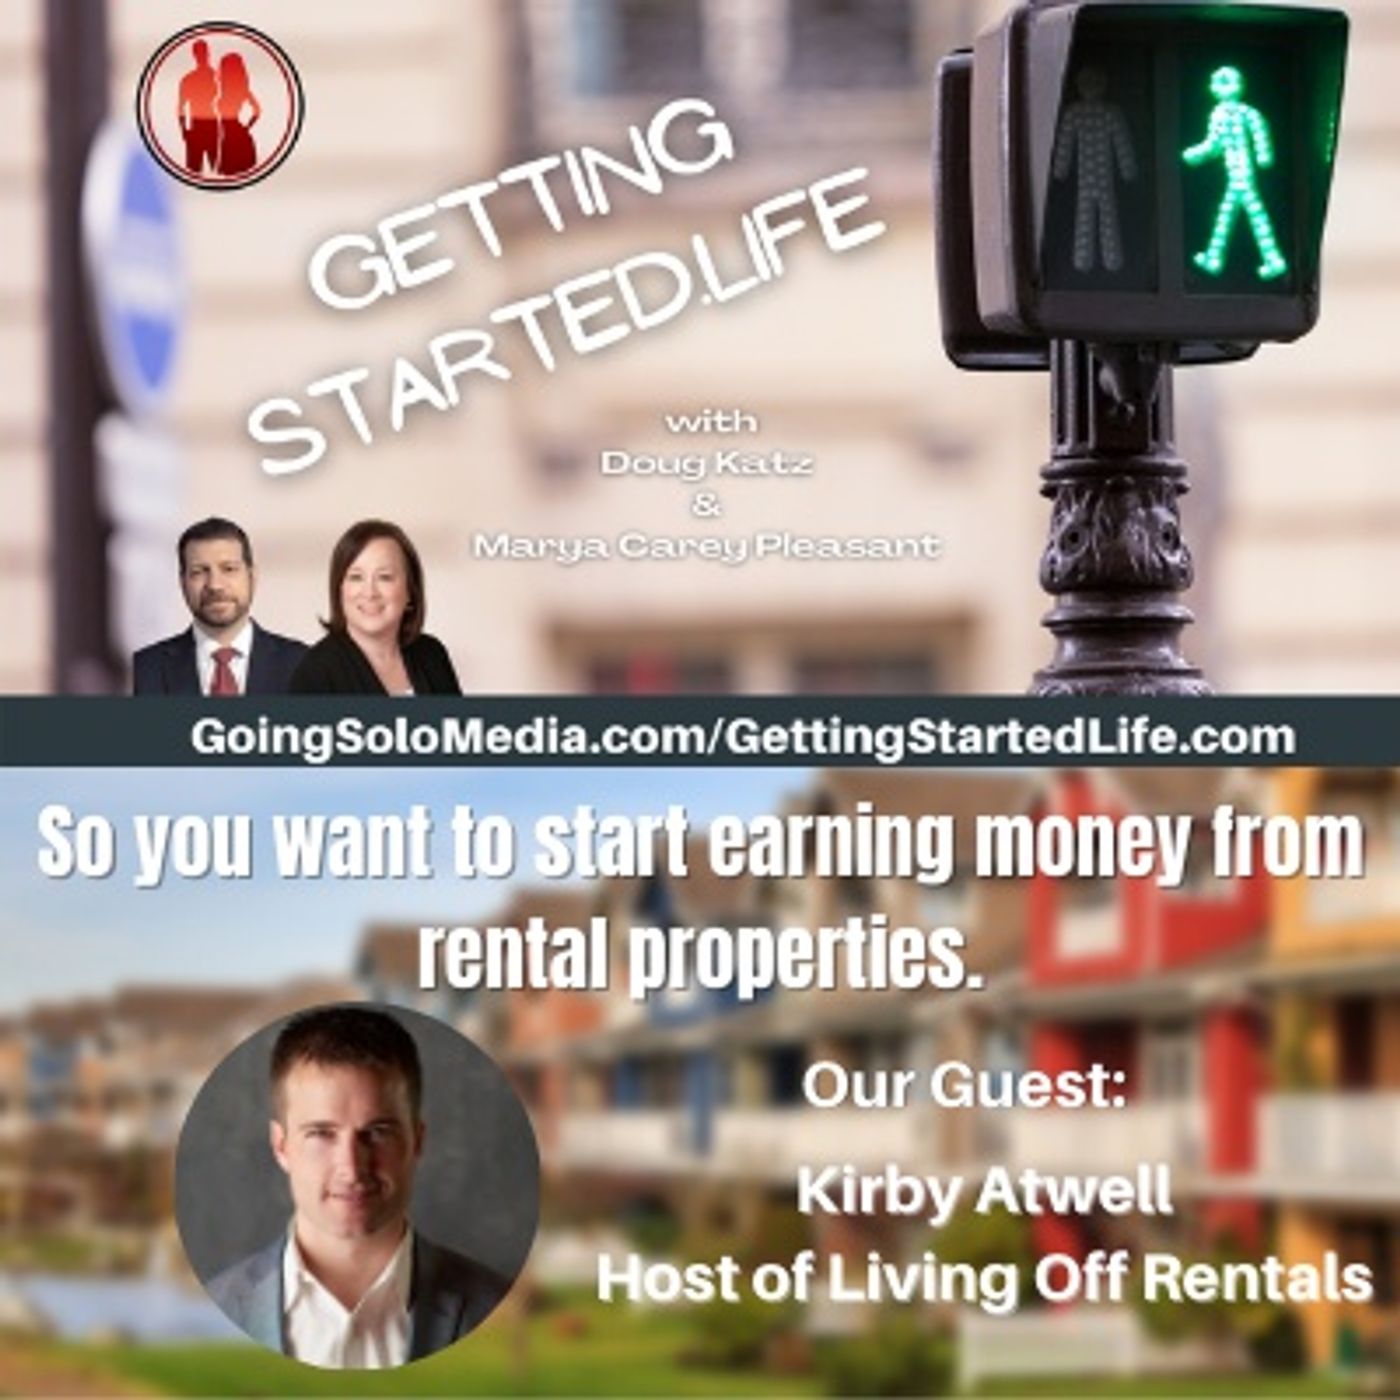 So you want to earn money from rental properties